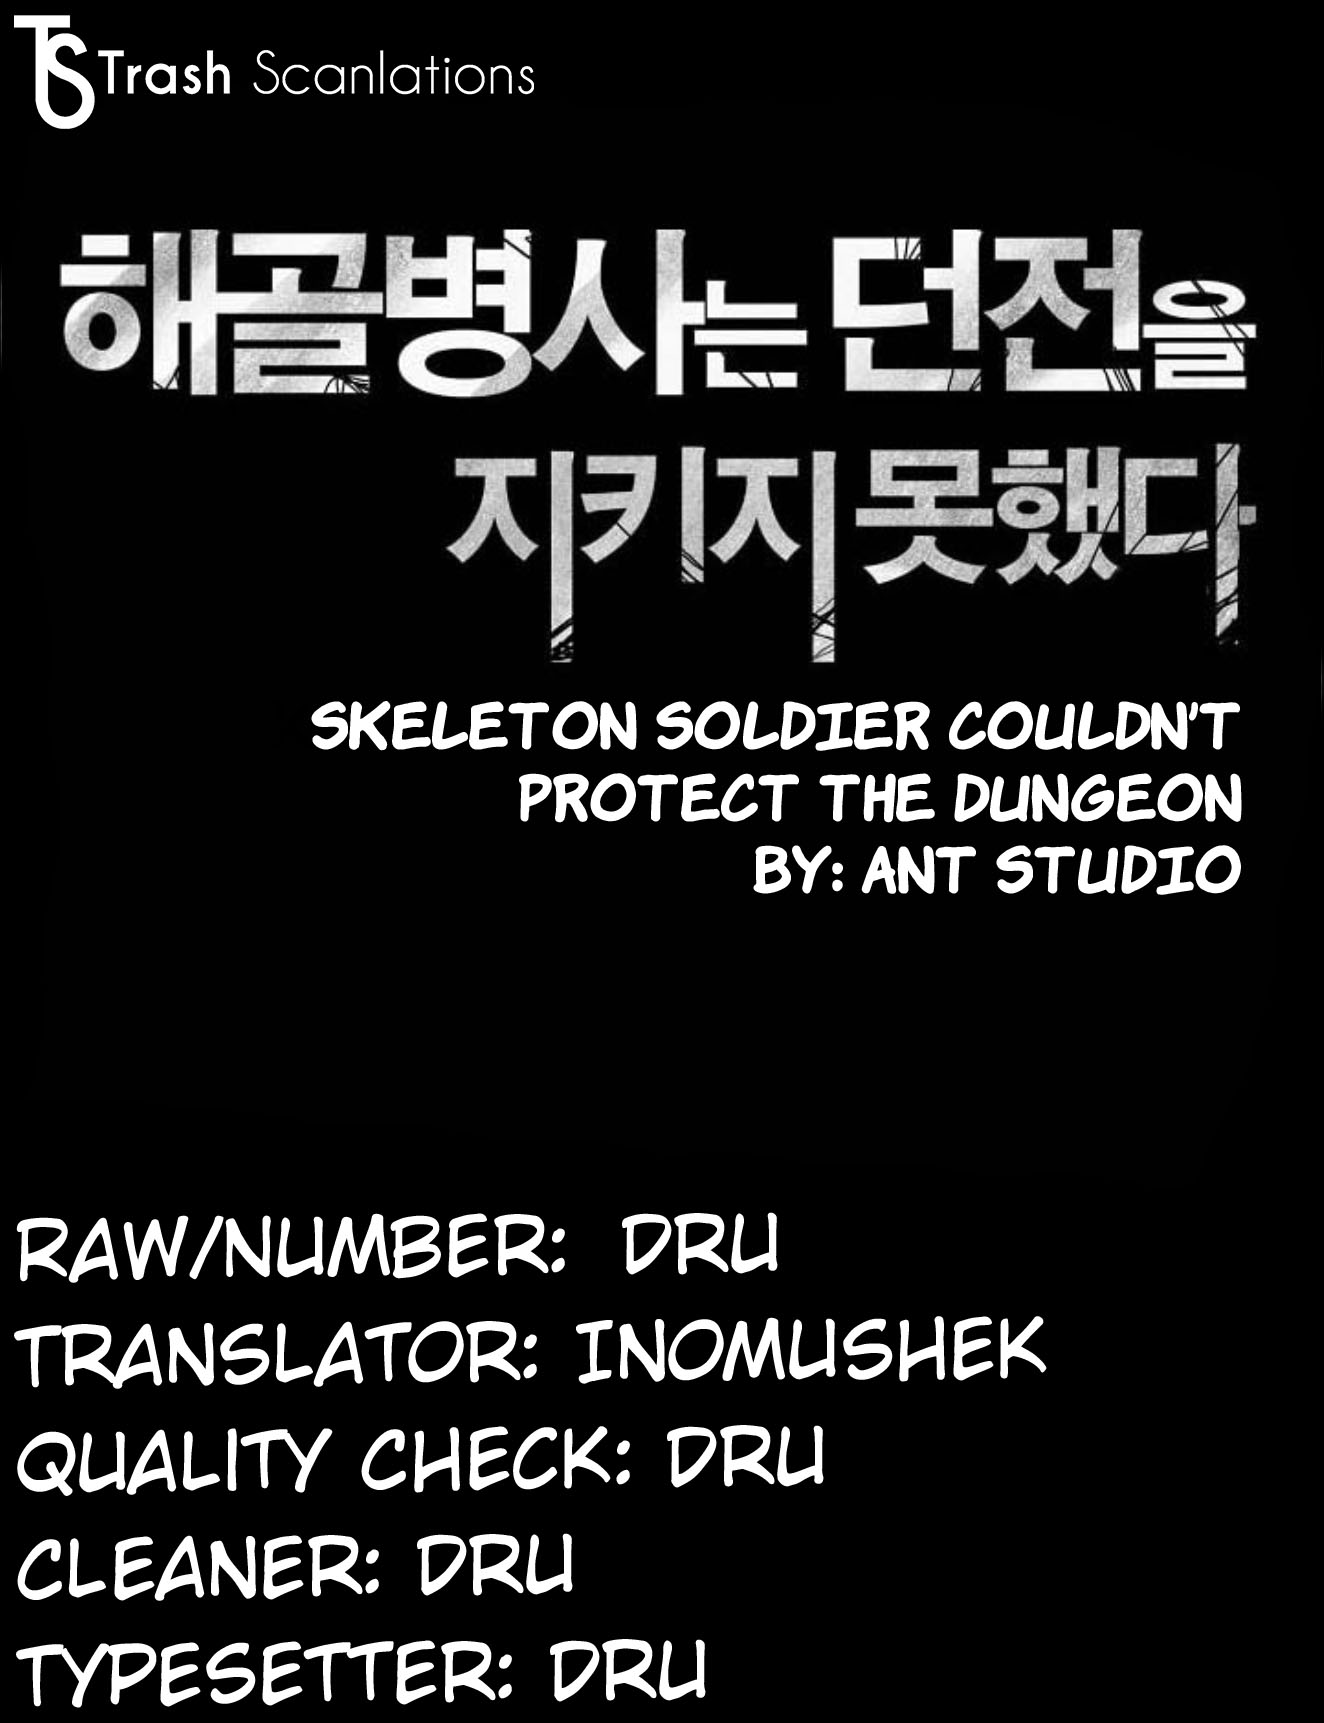 Skeleton Soldier (Skeleton Soldier Couldn't Protect the Dungeon) Ch.1